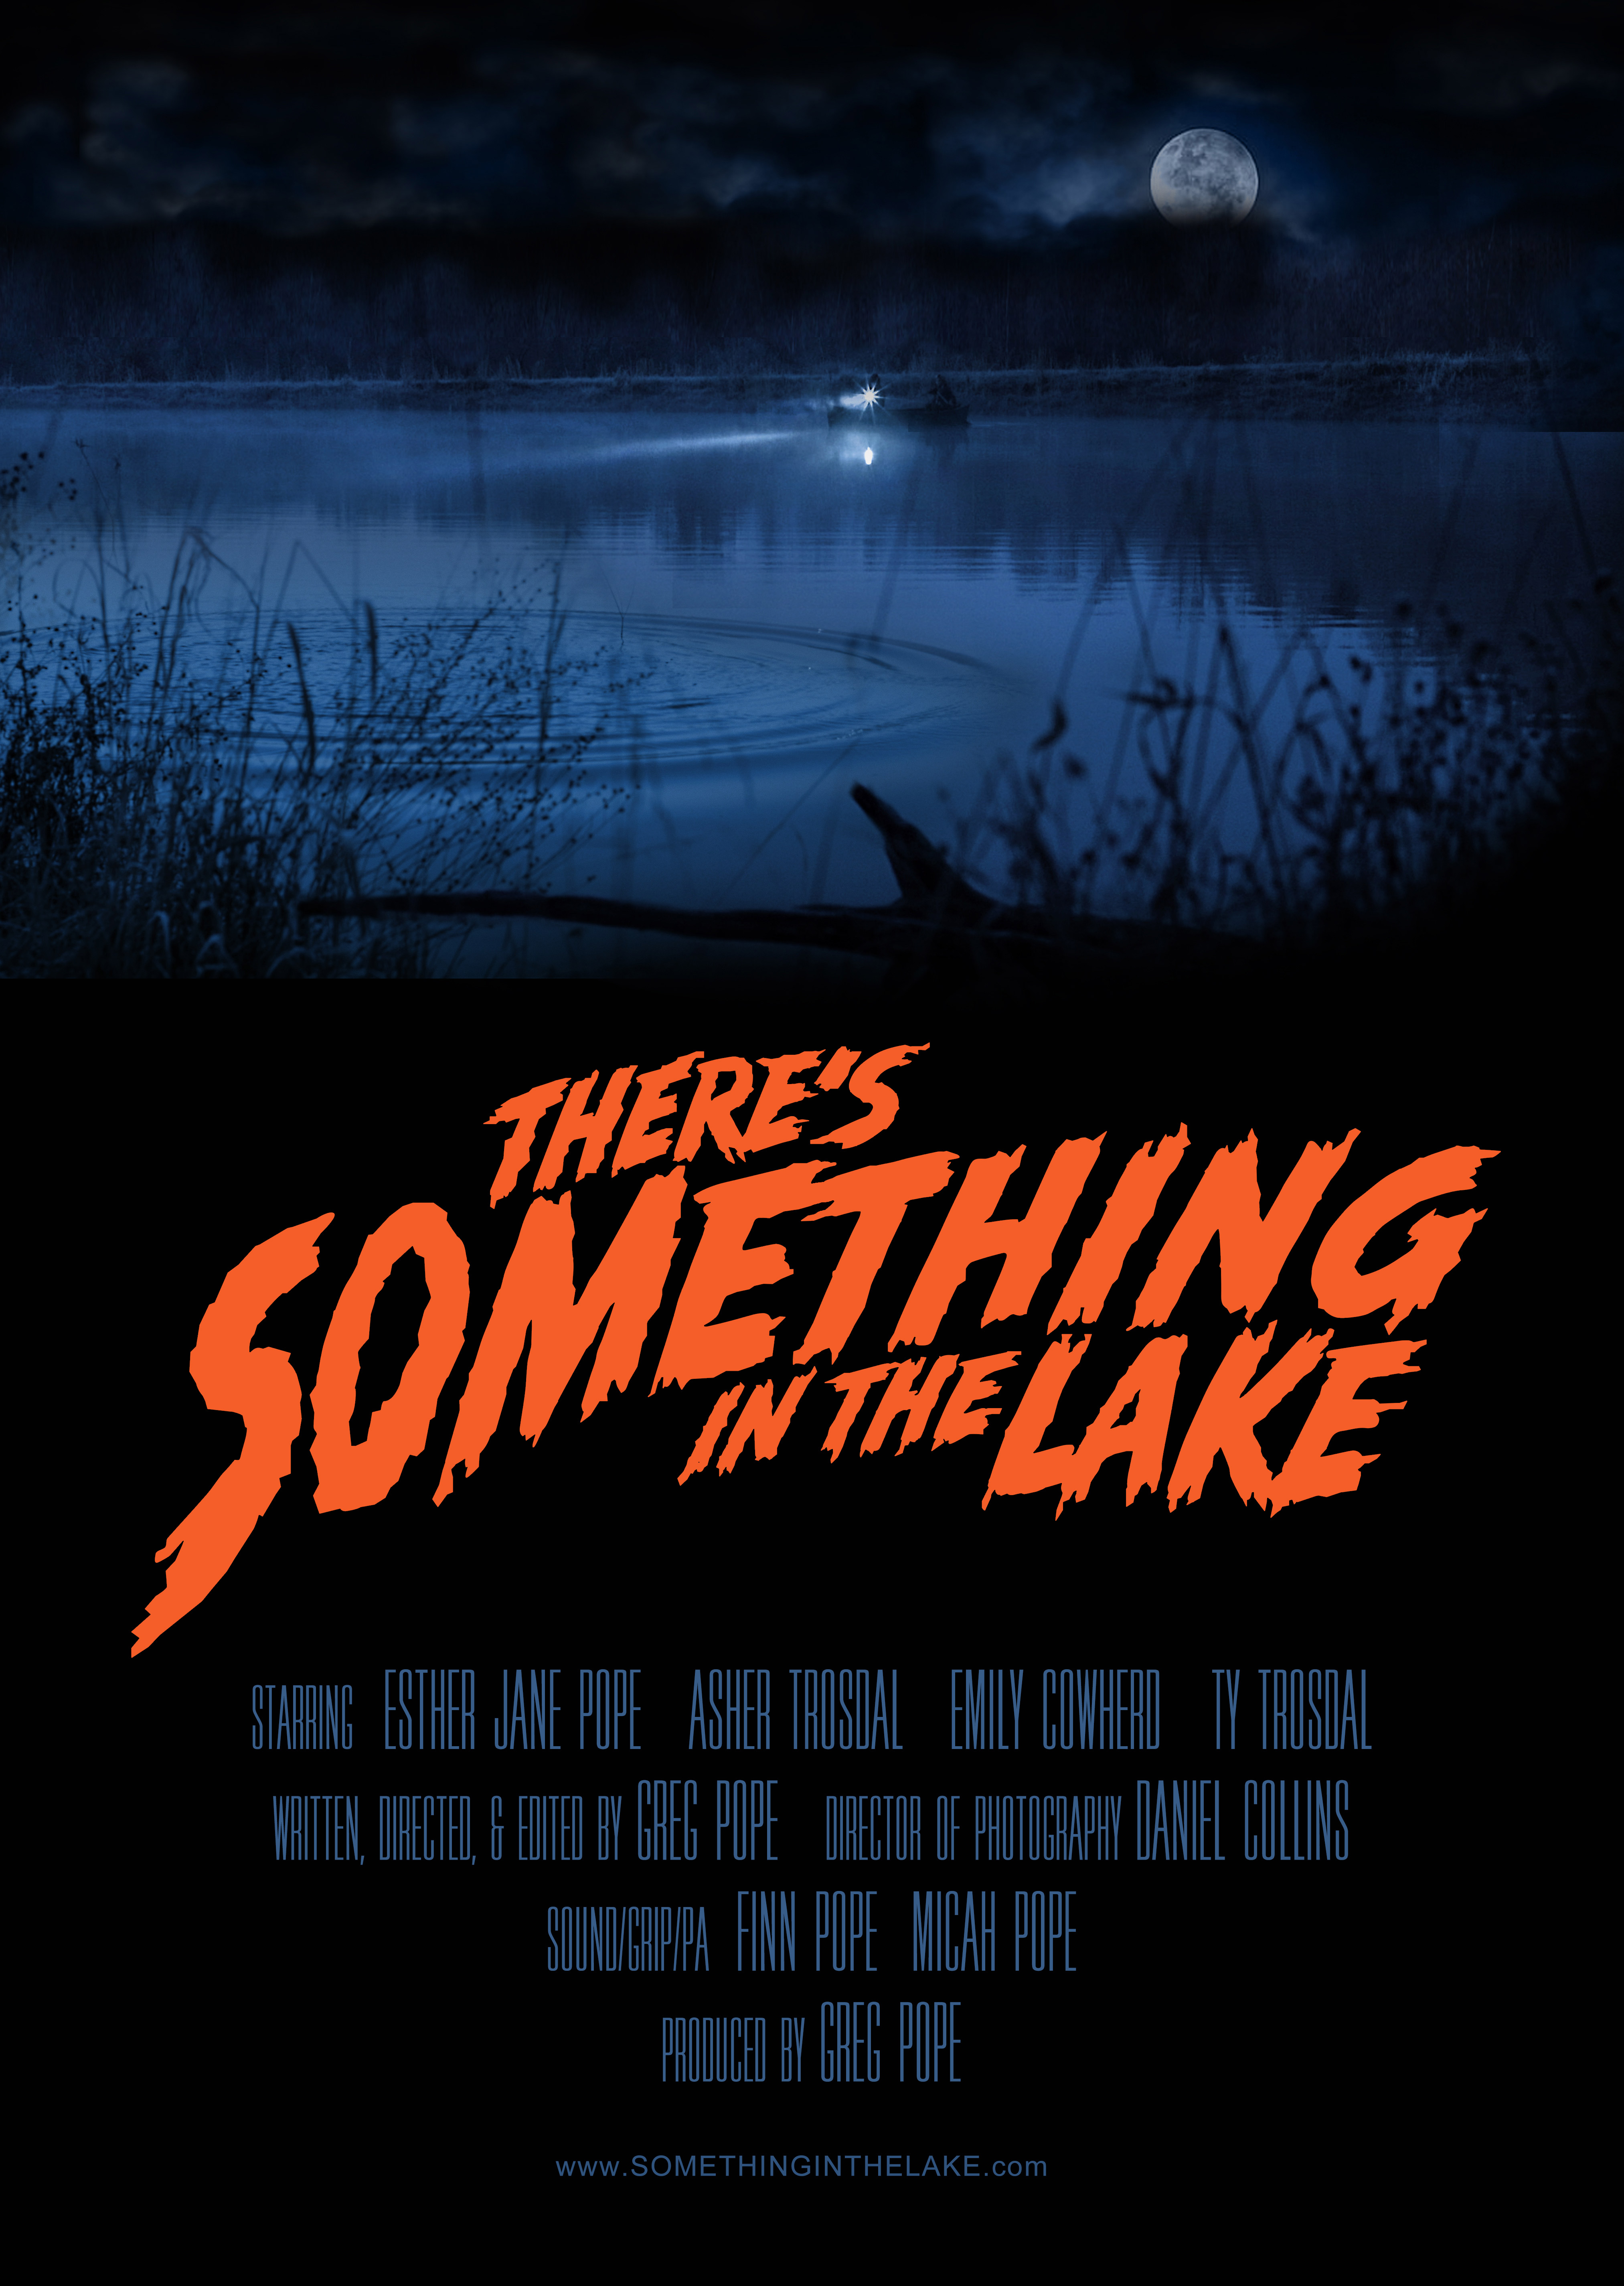 There's Something in the Lake